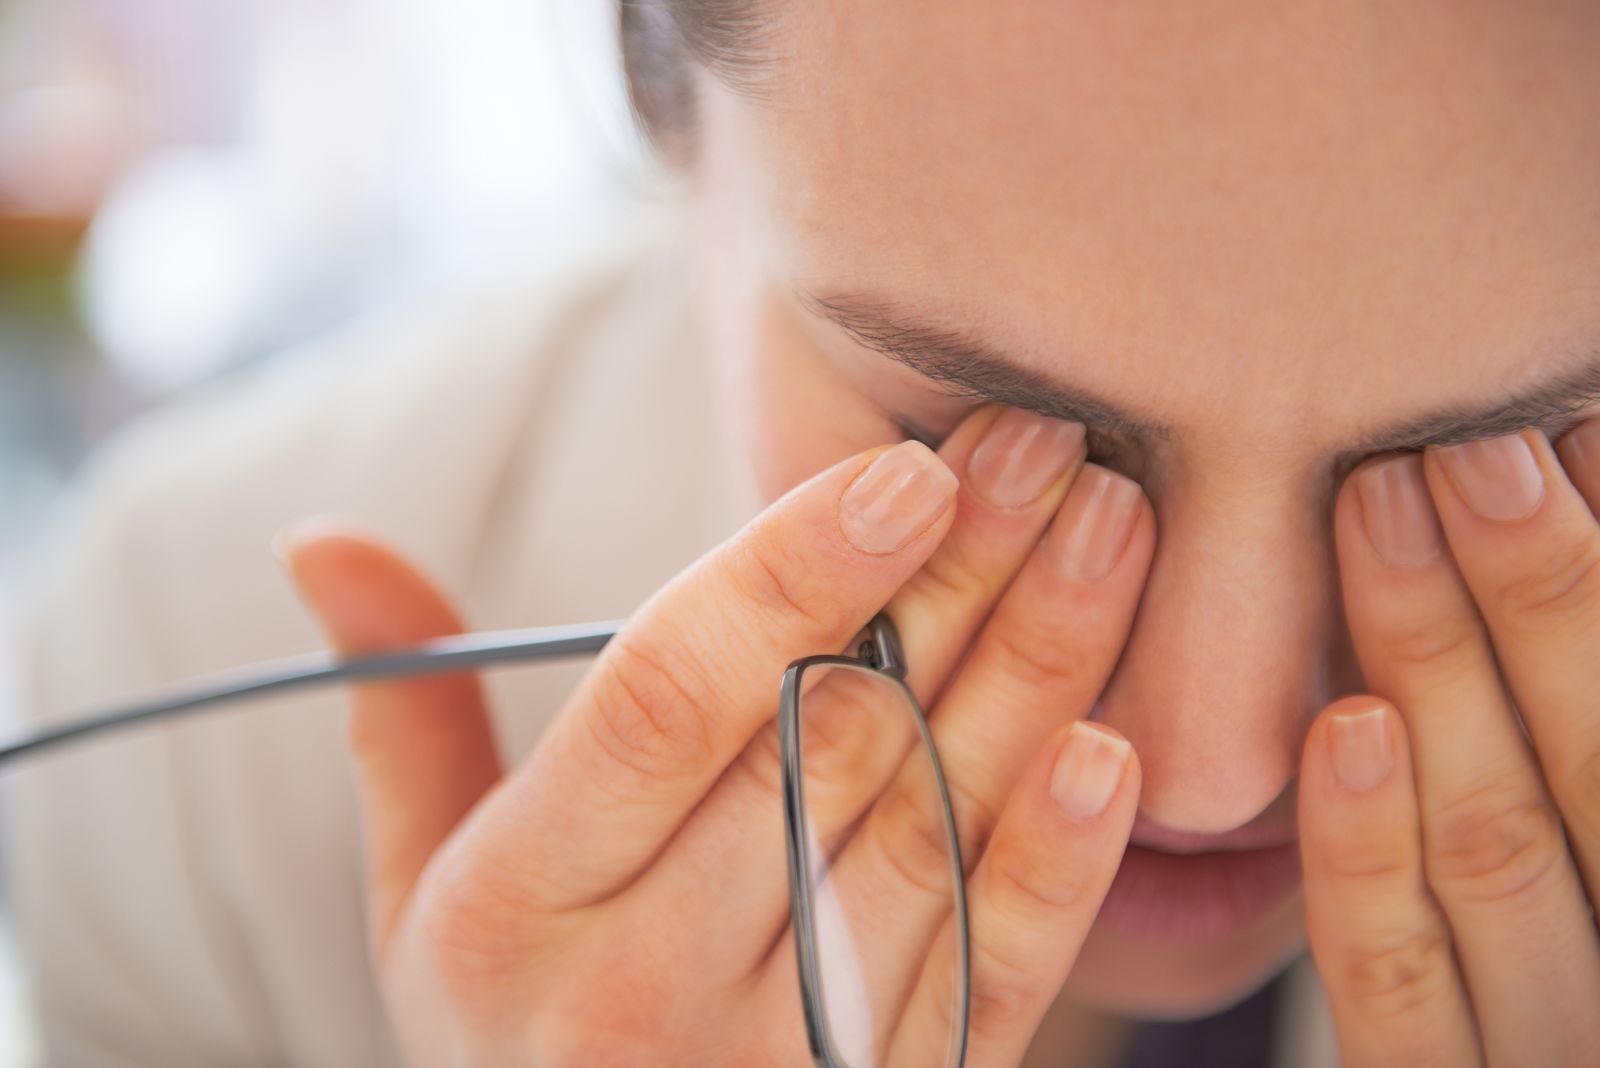 Finding the Top Treatments for Dry Eyes